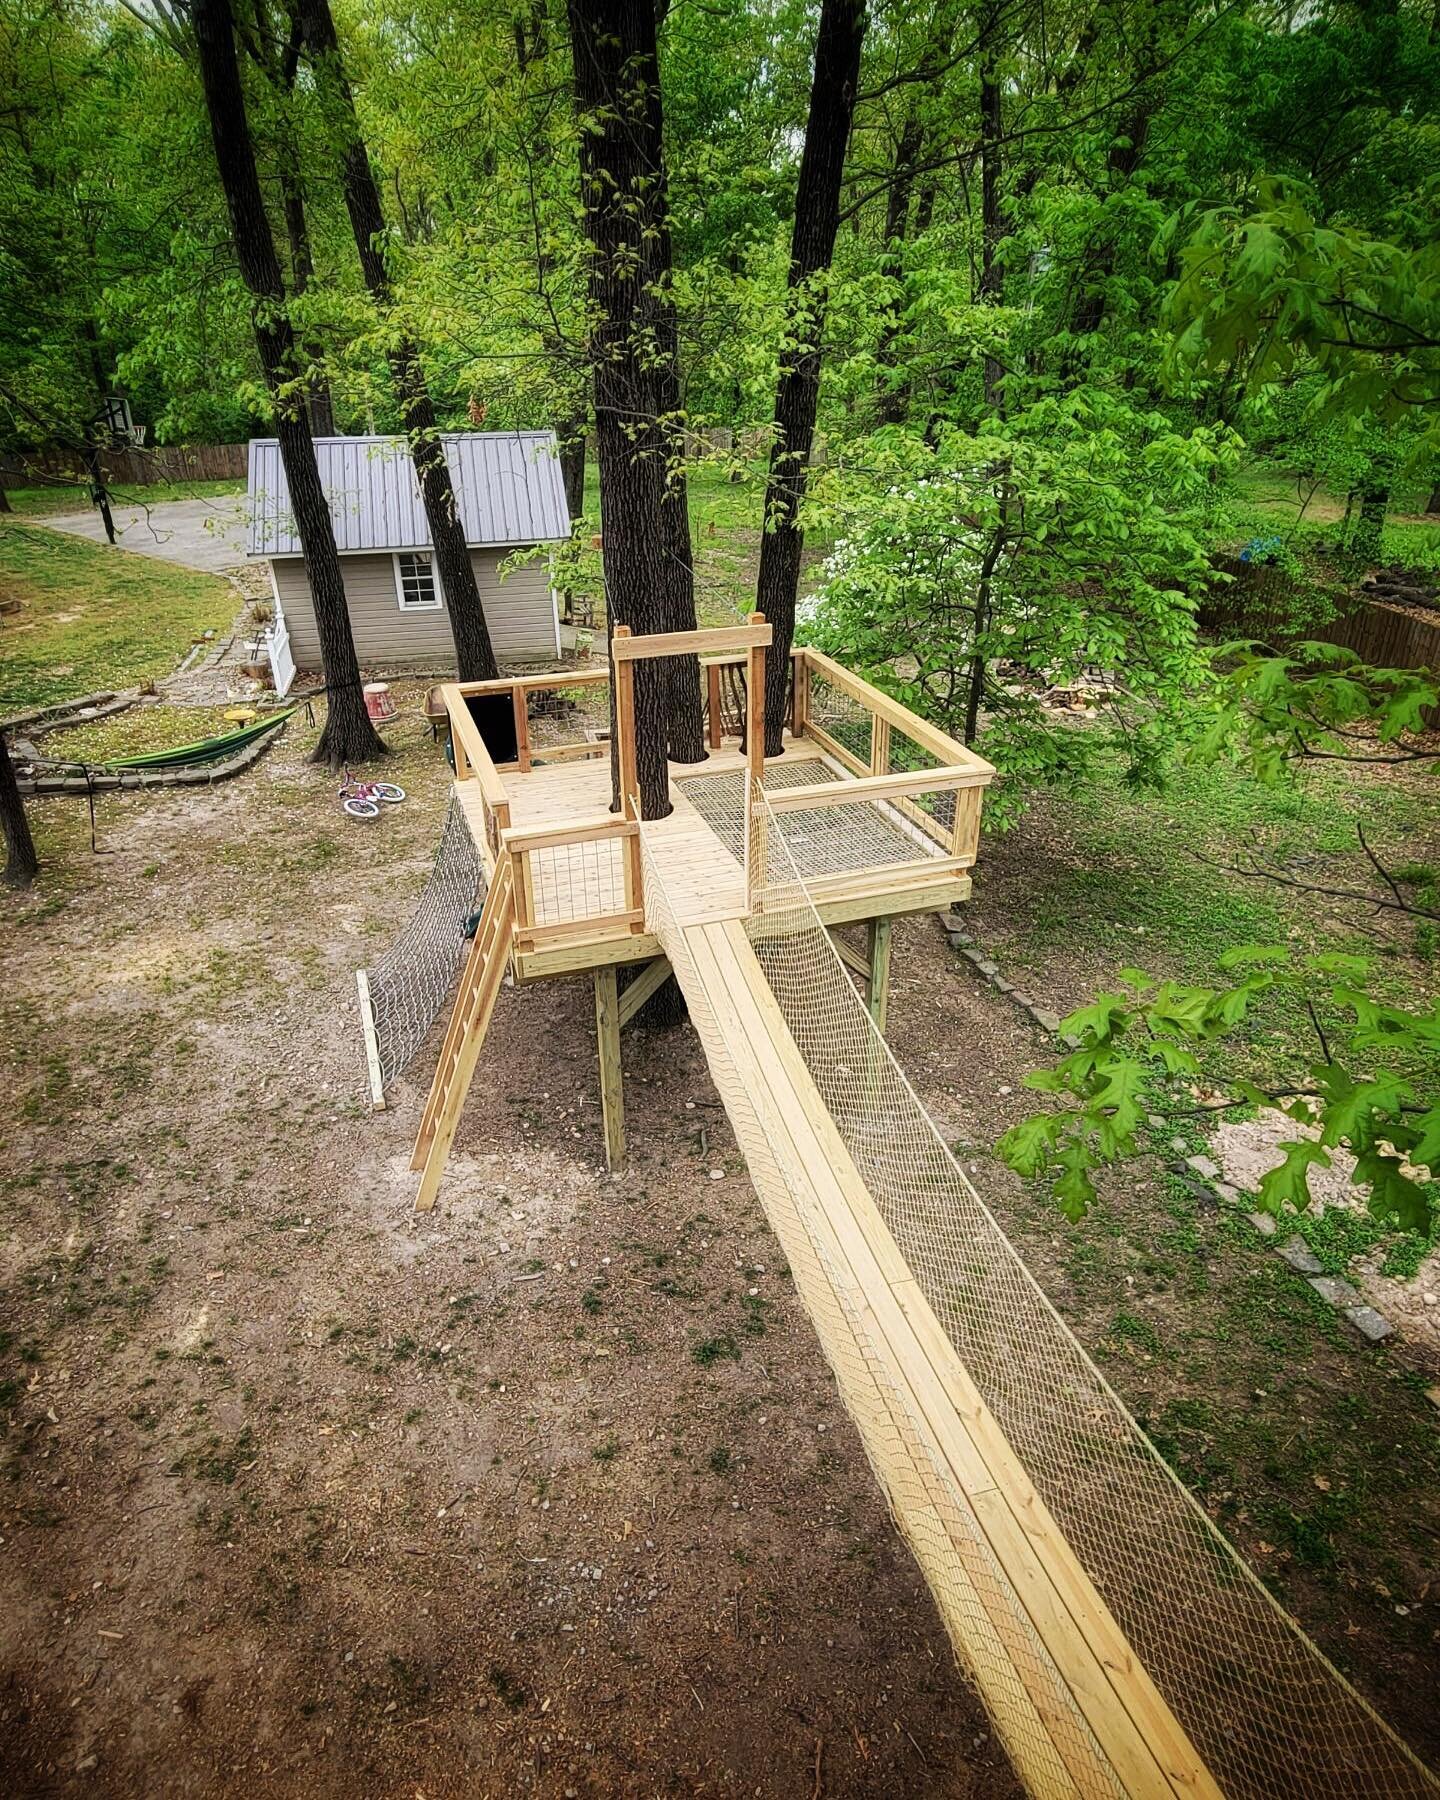 Super cool double treehouse with 26&rsquo; long swinging bridge, a lounge hammock and every fun accessory we could think of.  Thanks to @snaker85 for leadership and superb craftsmanship on this project.
.
#treehouse #swingingbridge #hammock #arkansas